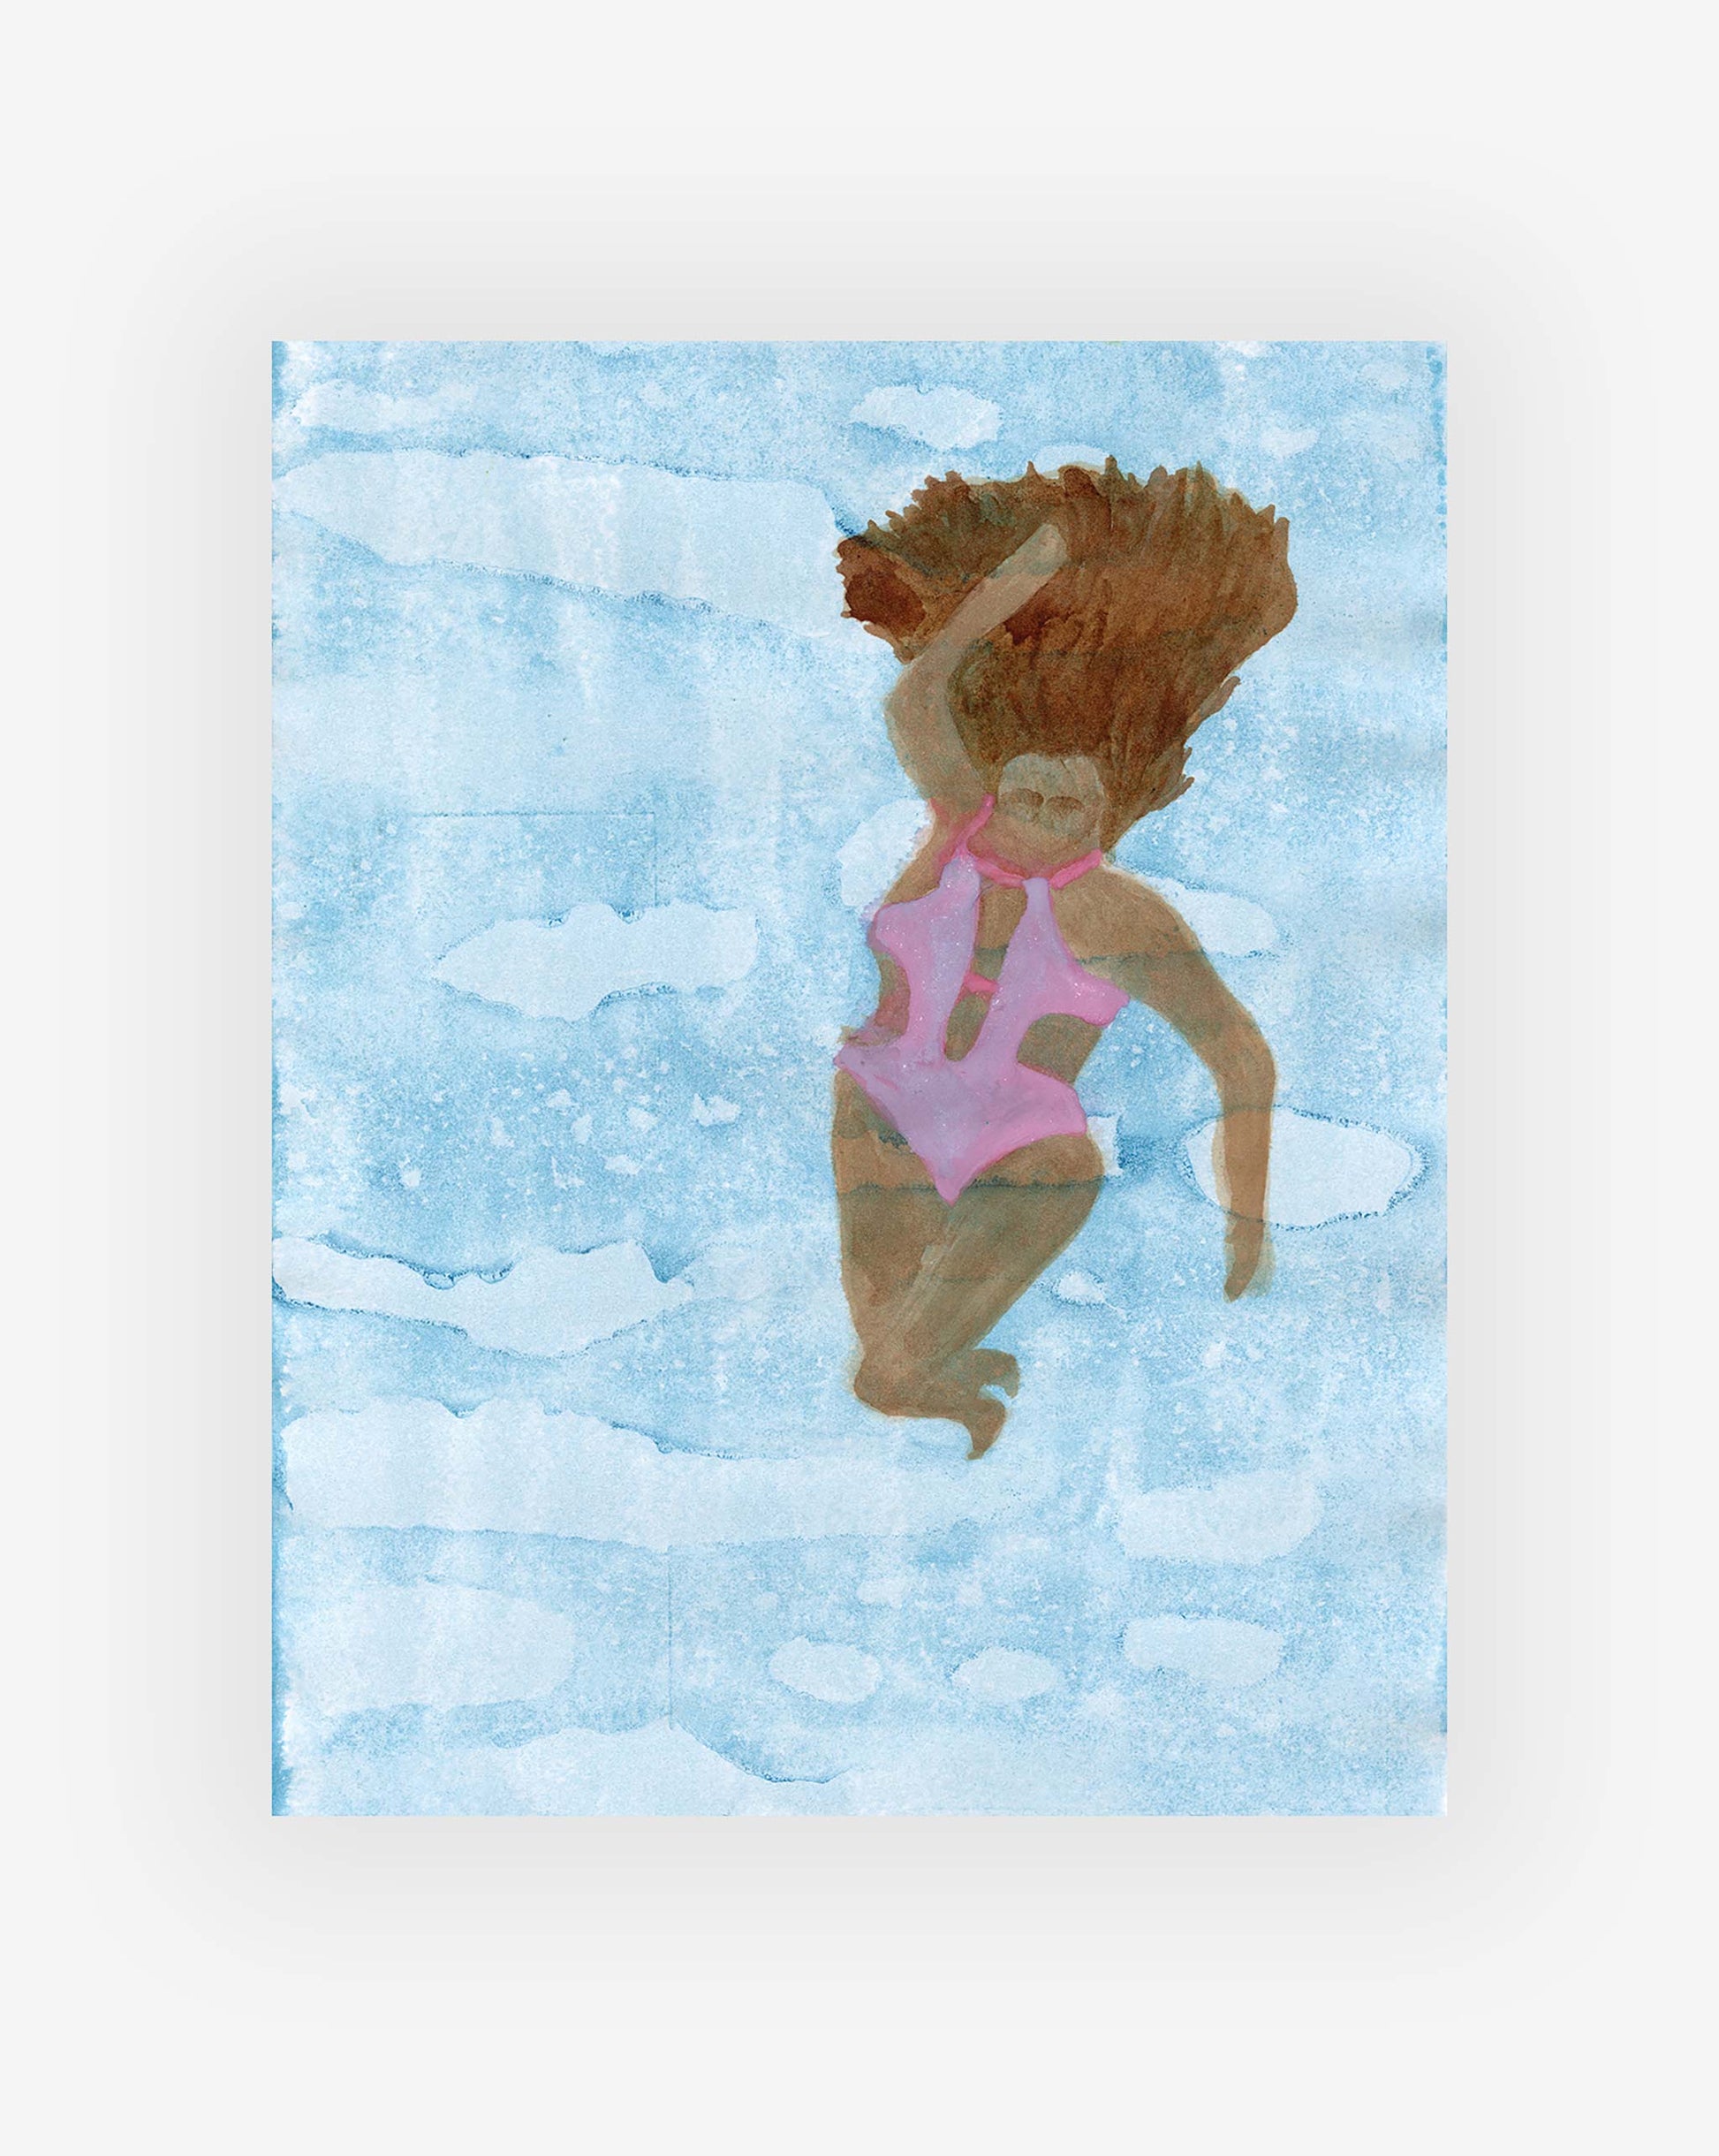 A watercolor painting by artist Shanan Campanaro depicts a person swimming in a pool, wearing a pink swimsuit. The blue water, skillfully rendered, shows light reflections and gentle waves, capturing the serene beauty Swim Print is known for.